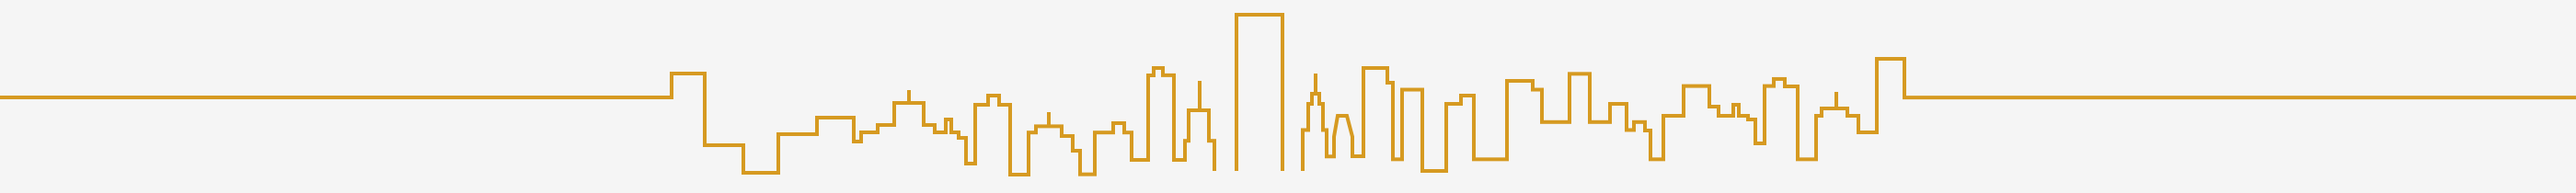 A divider graphic showing an image of a city skyline